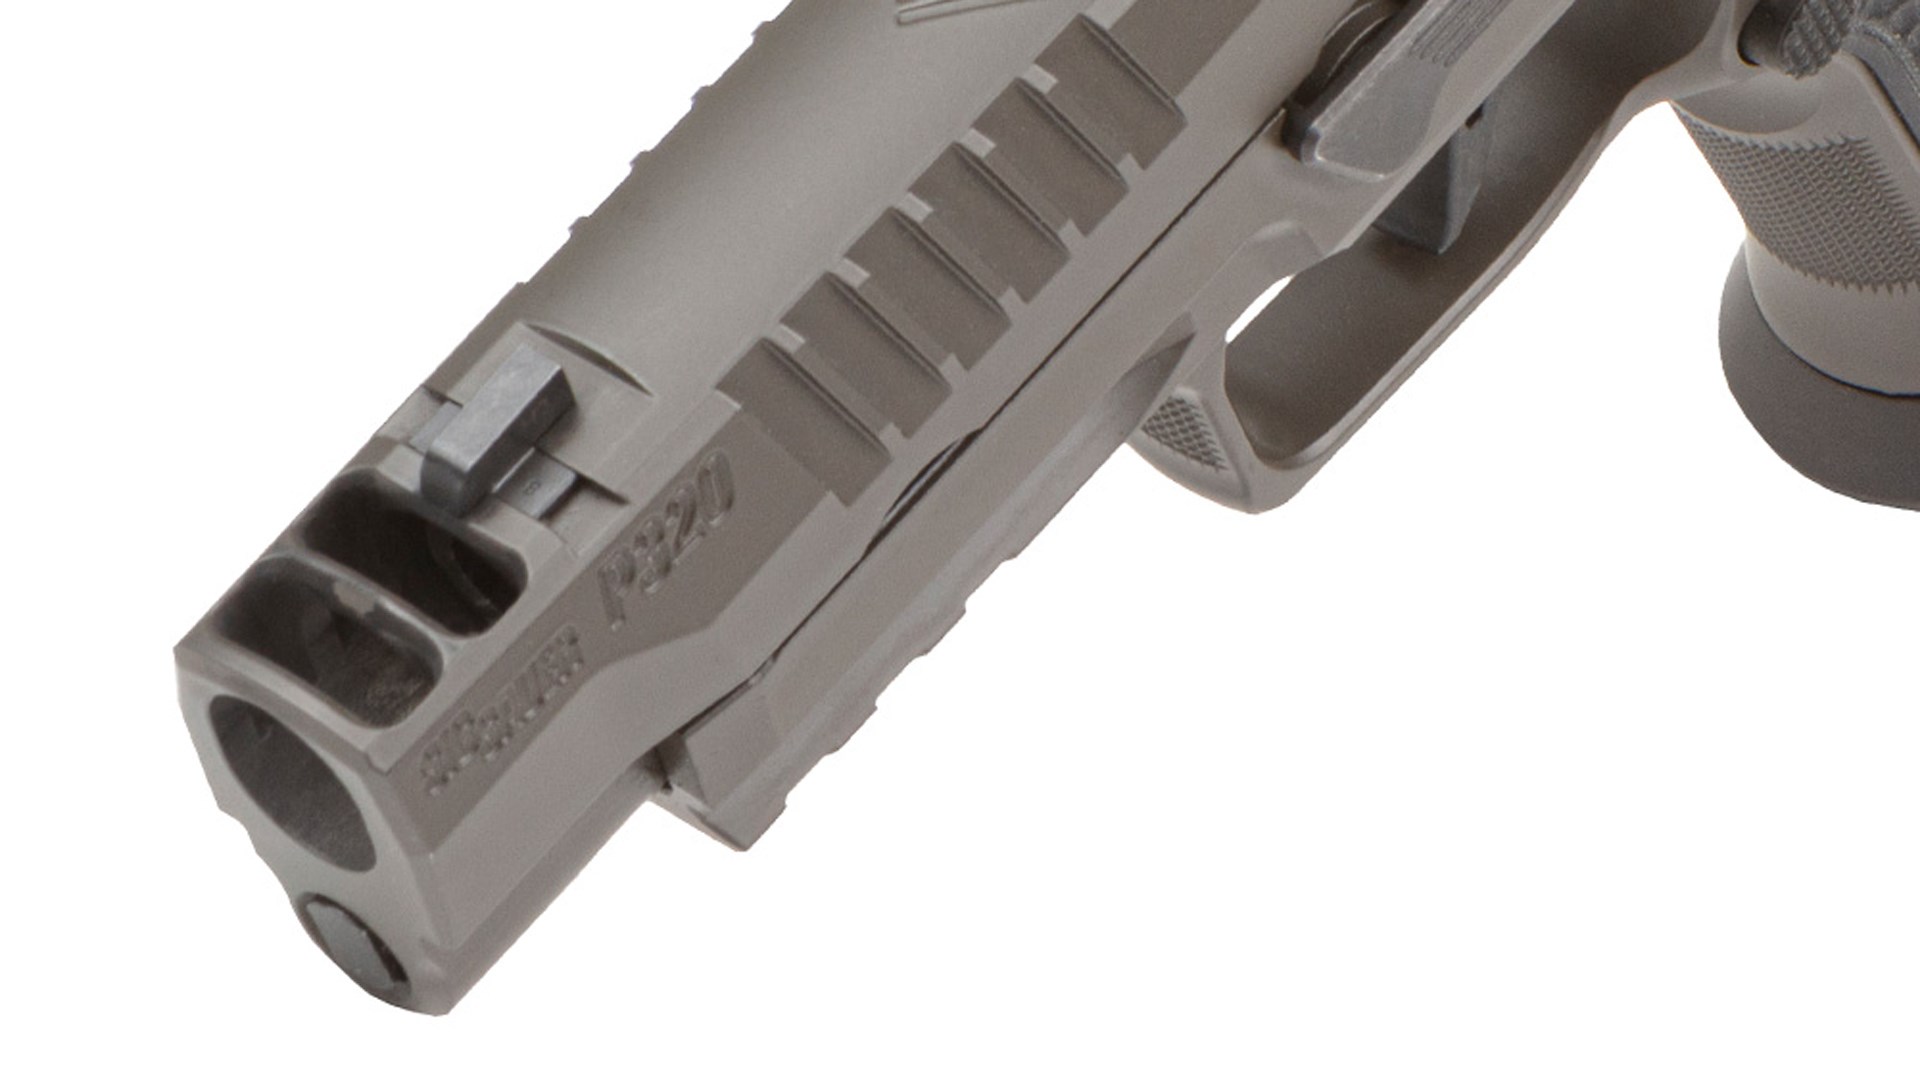 A close-up shot of the ports on top of the SIG Sauer P320-AXG Legion pistol's slide.